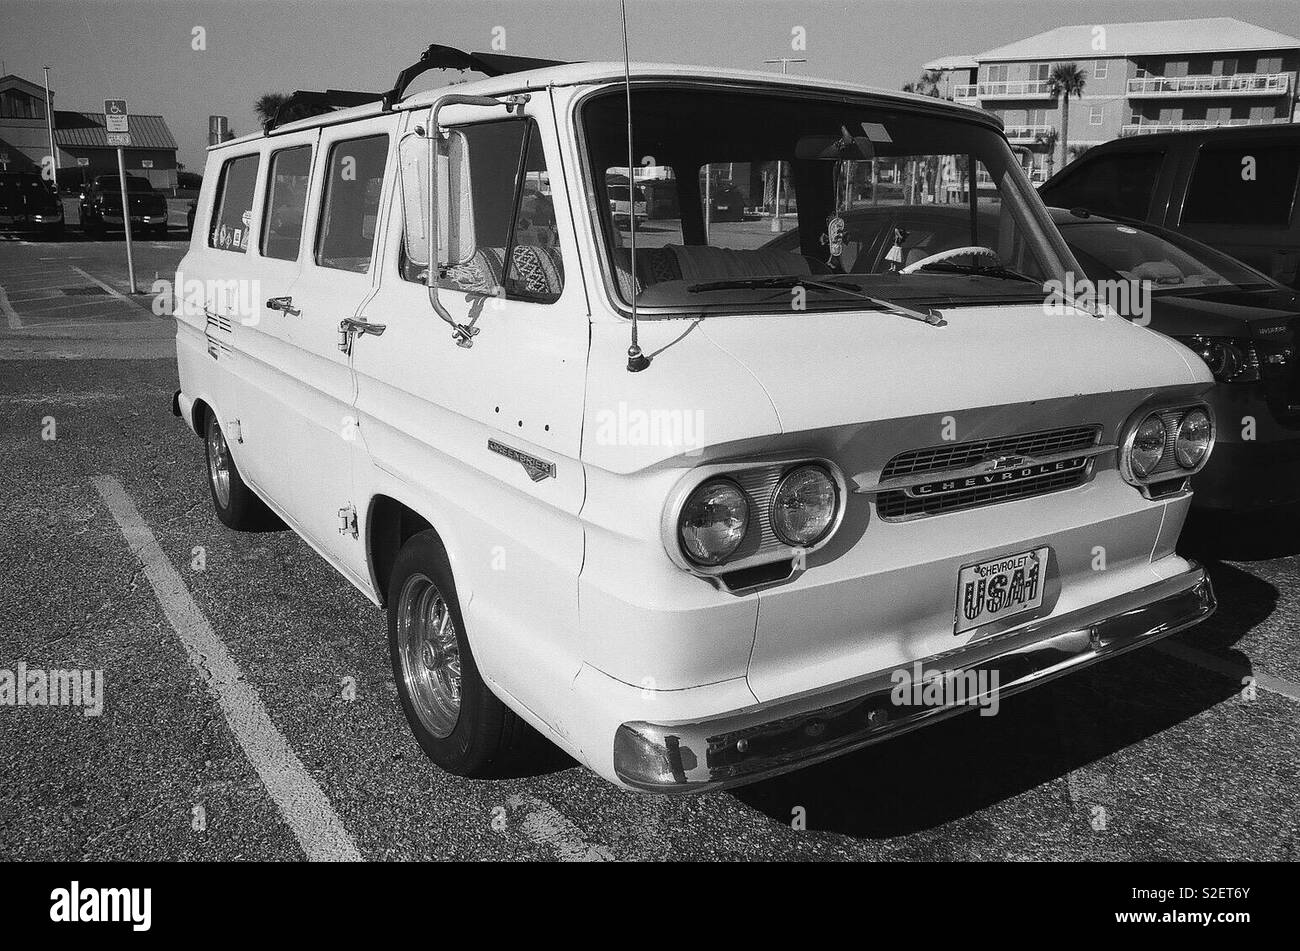 Surf Van High Resolution Stock Photography and Images - Alamy